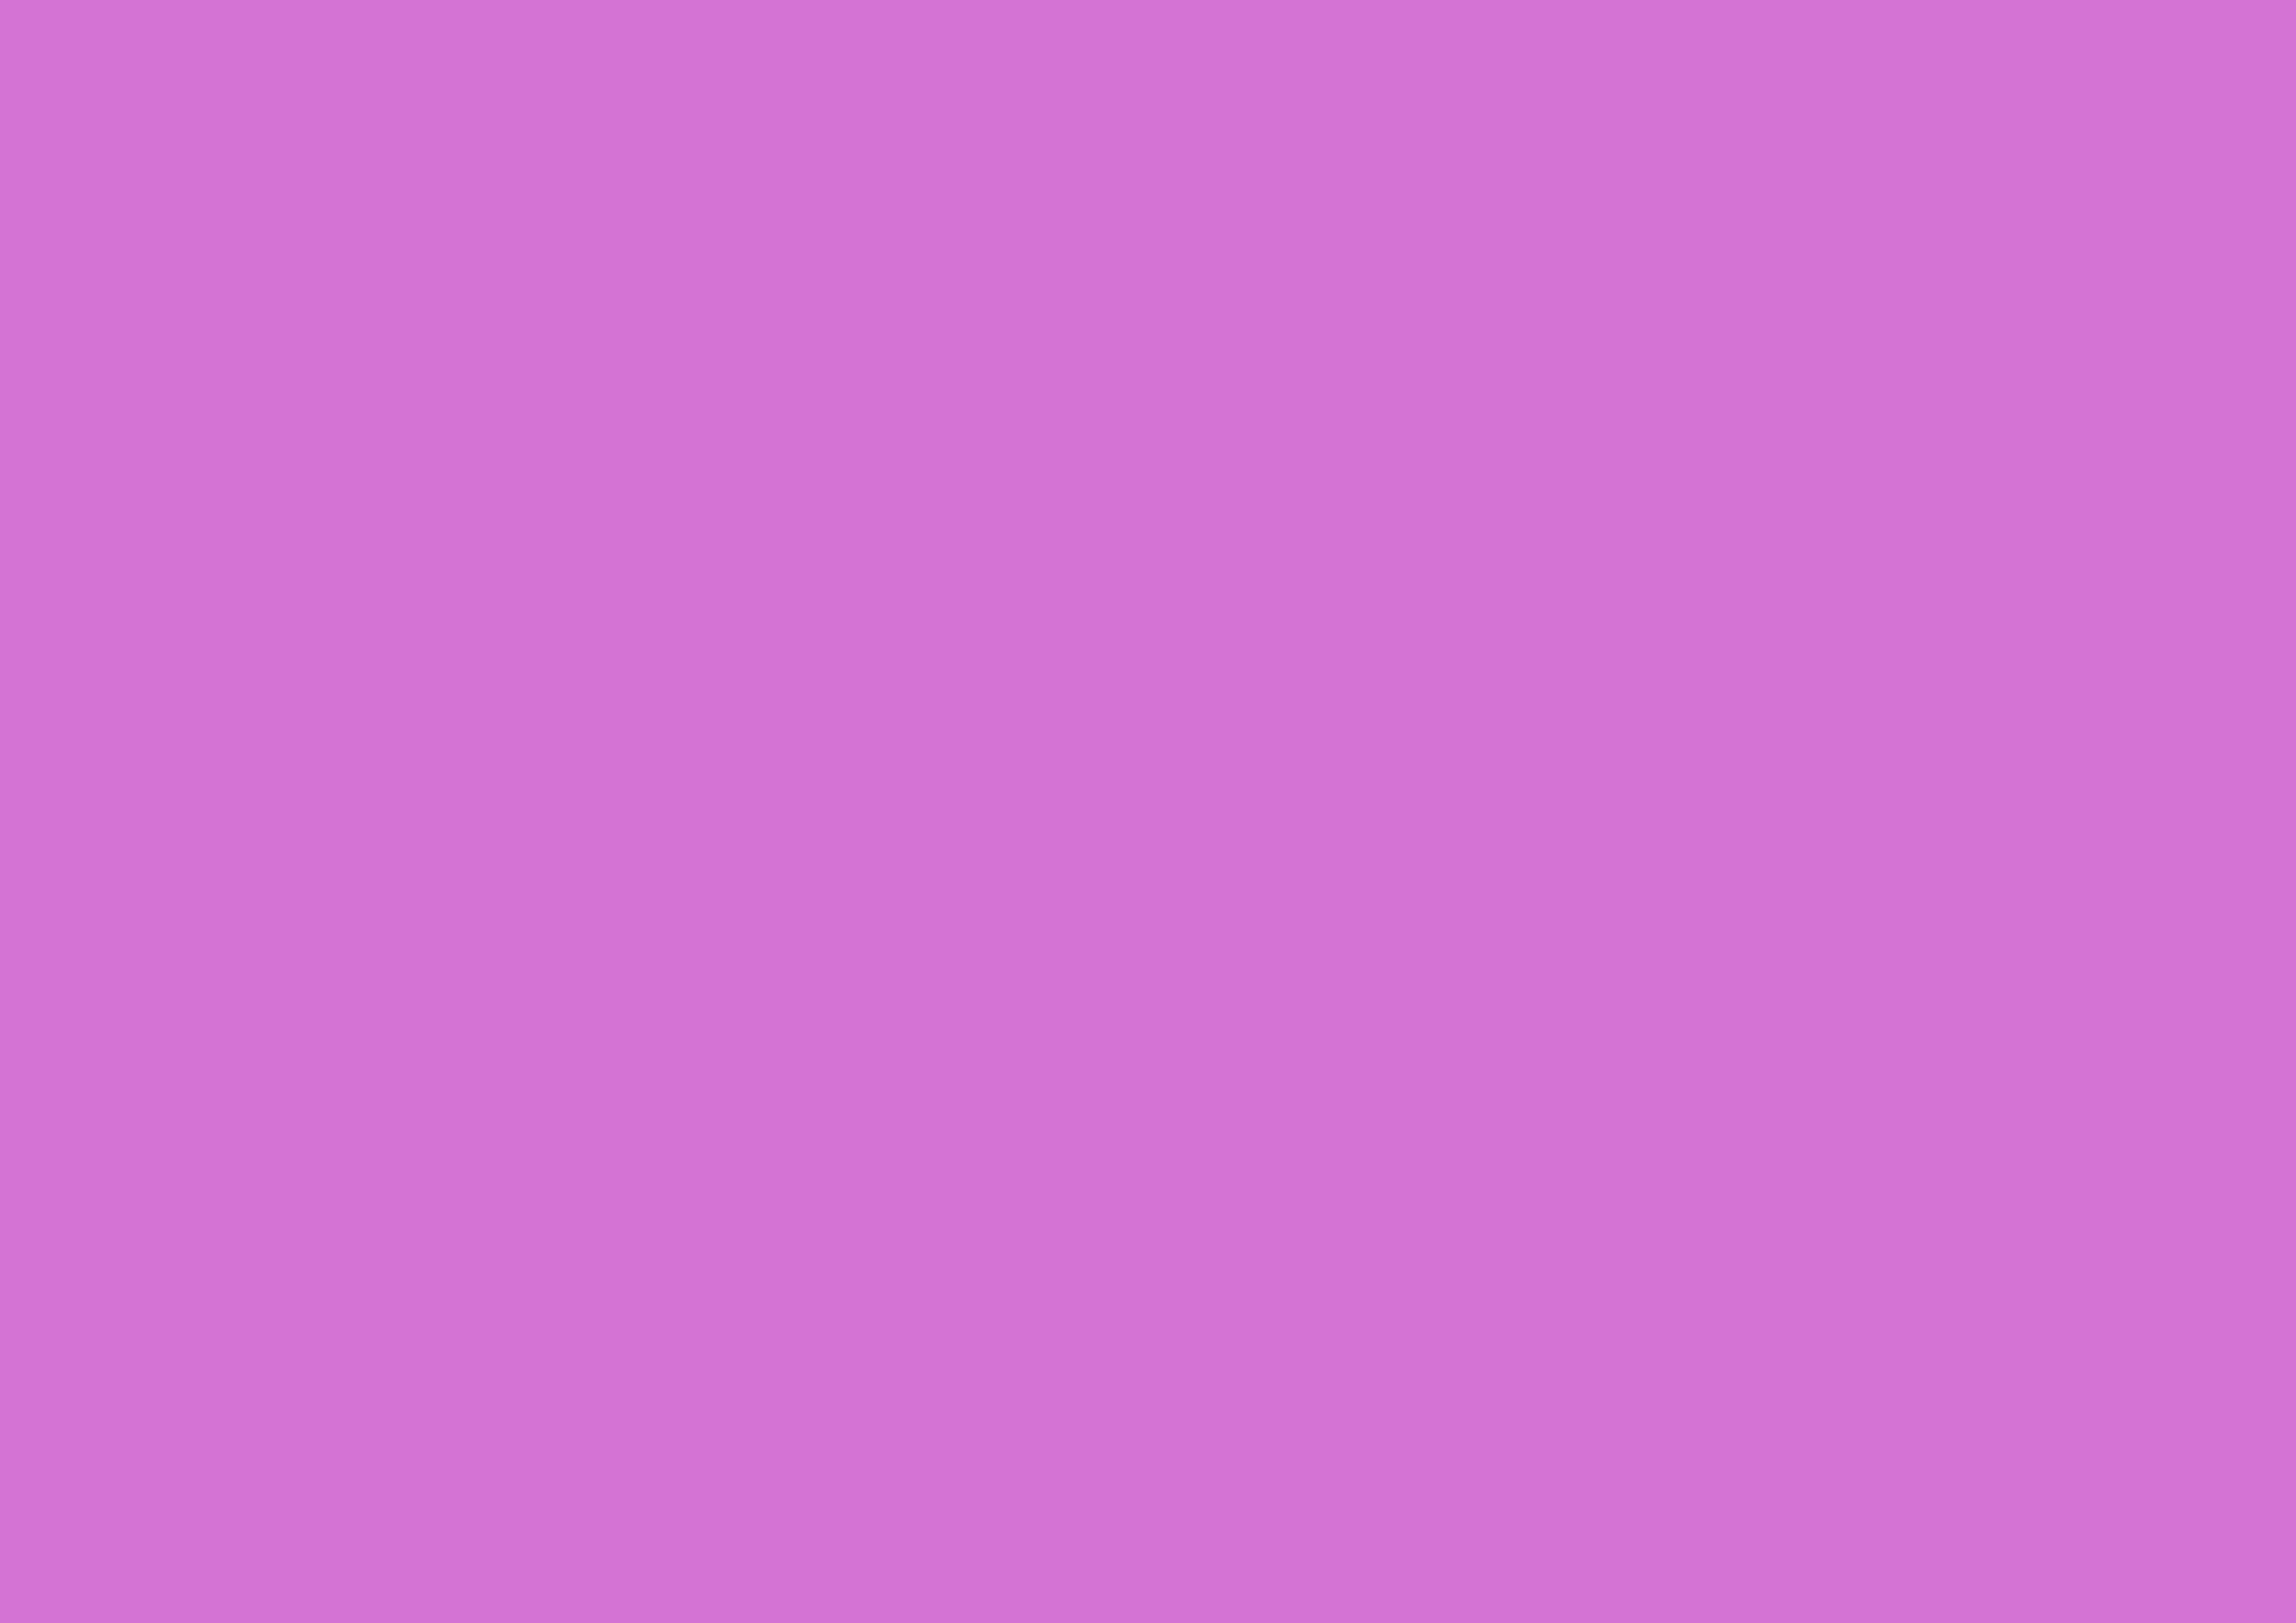 3508x2480 French Mauve Solid Color Background